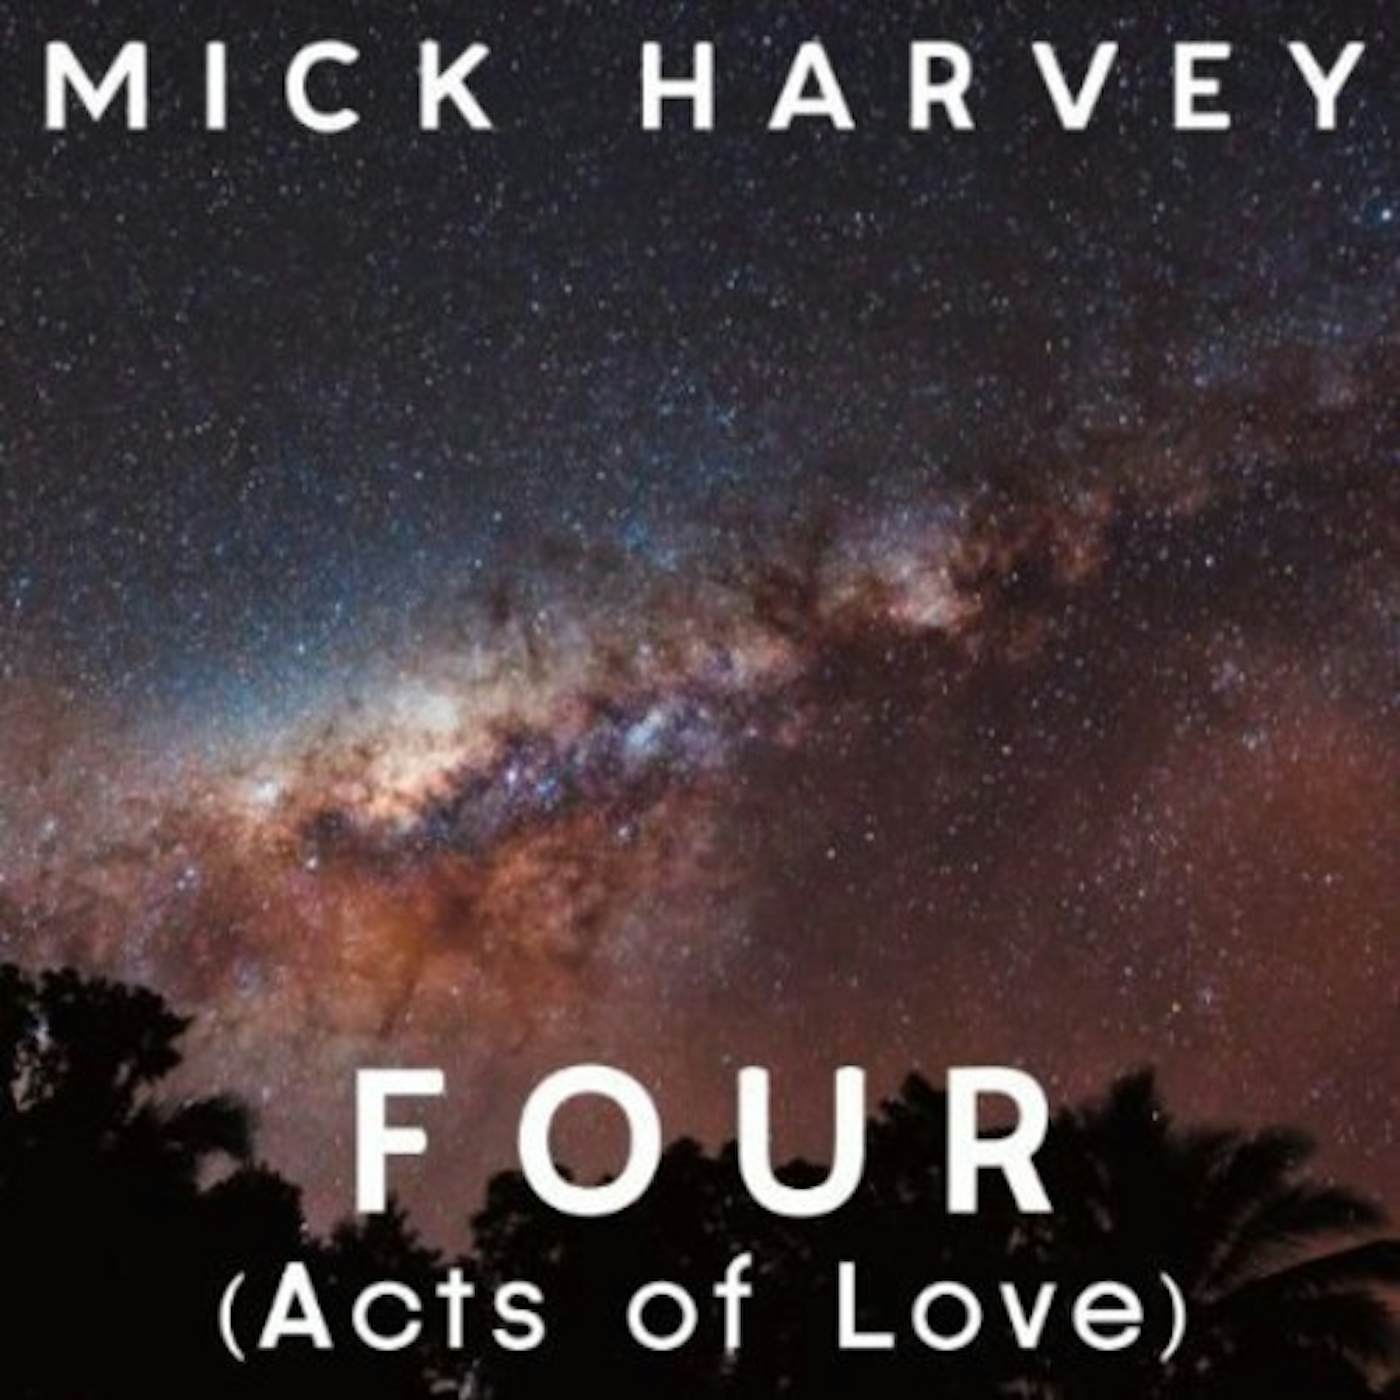 Mick Harvey FOUR (ACTS OF LOVE) CD